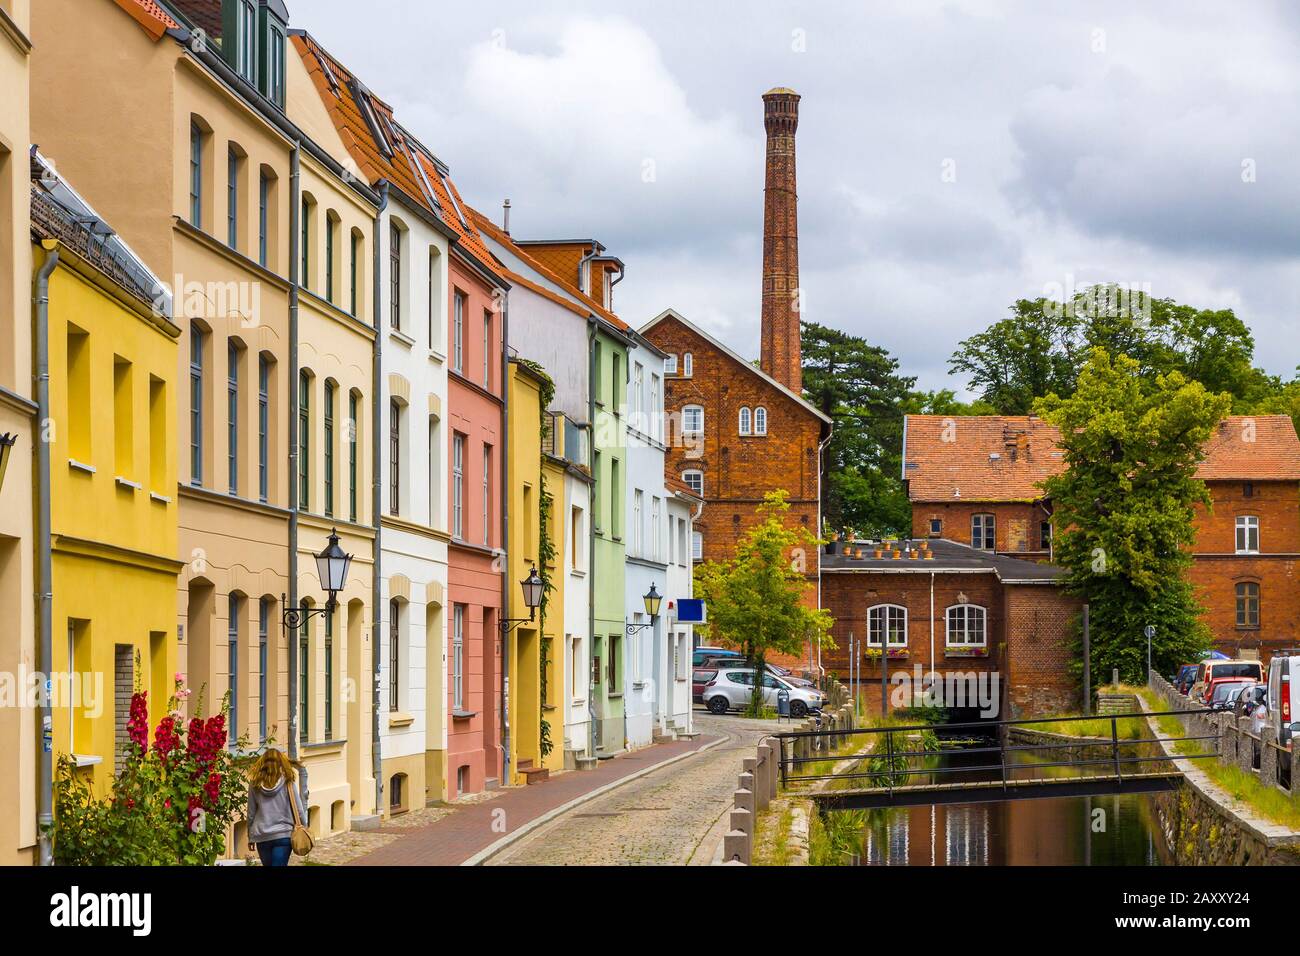 On the streets of Wismar old town. Colorful houses along the canal of Grube river, Wismar city, Mecklenburg-Vorpommern state, Germany Stock Photo